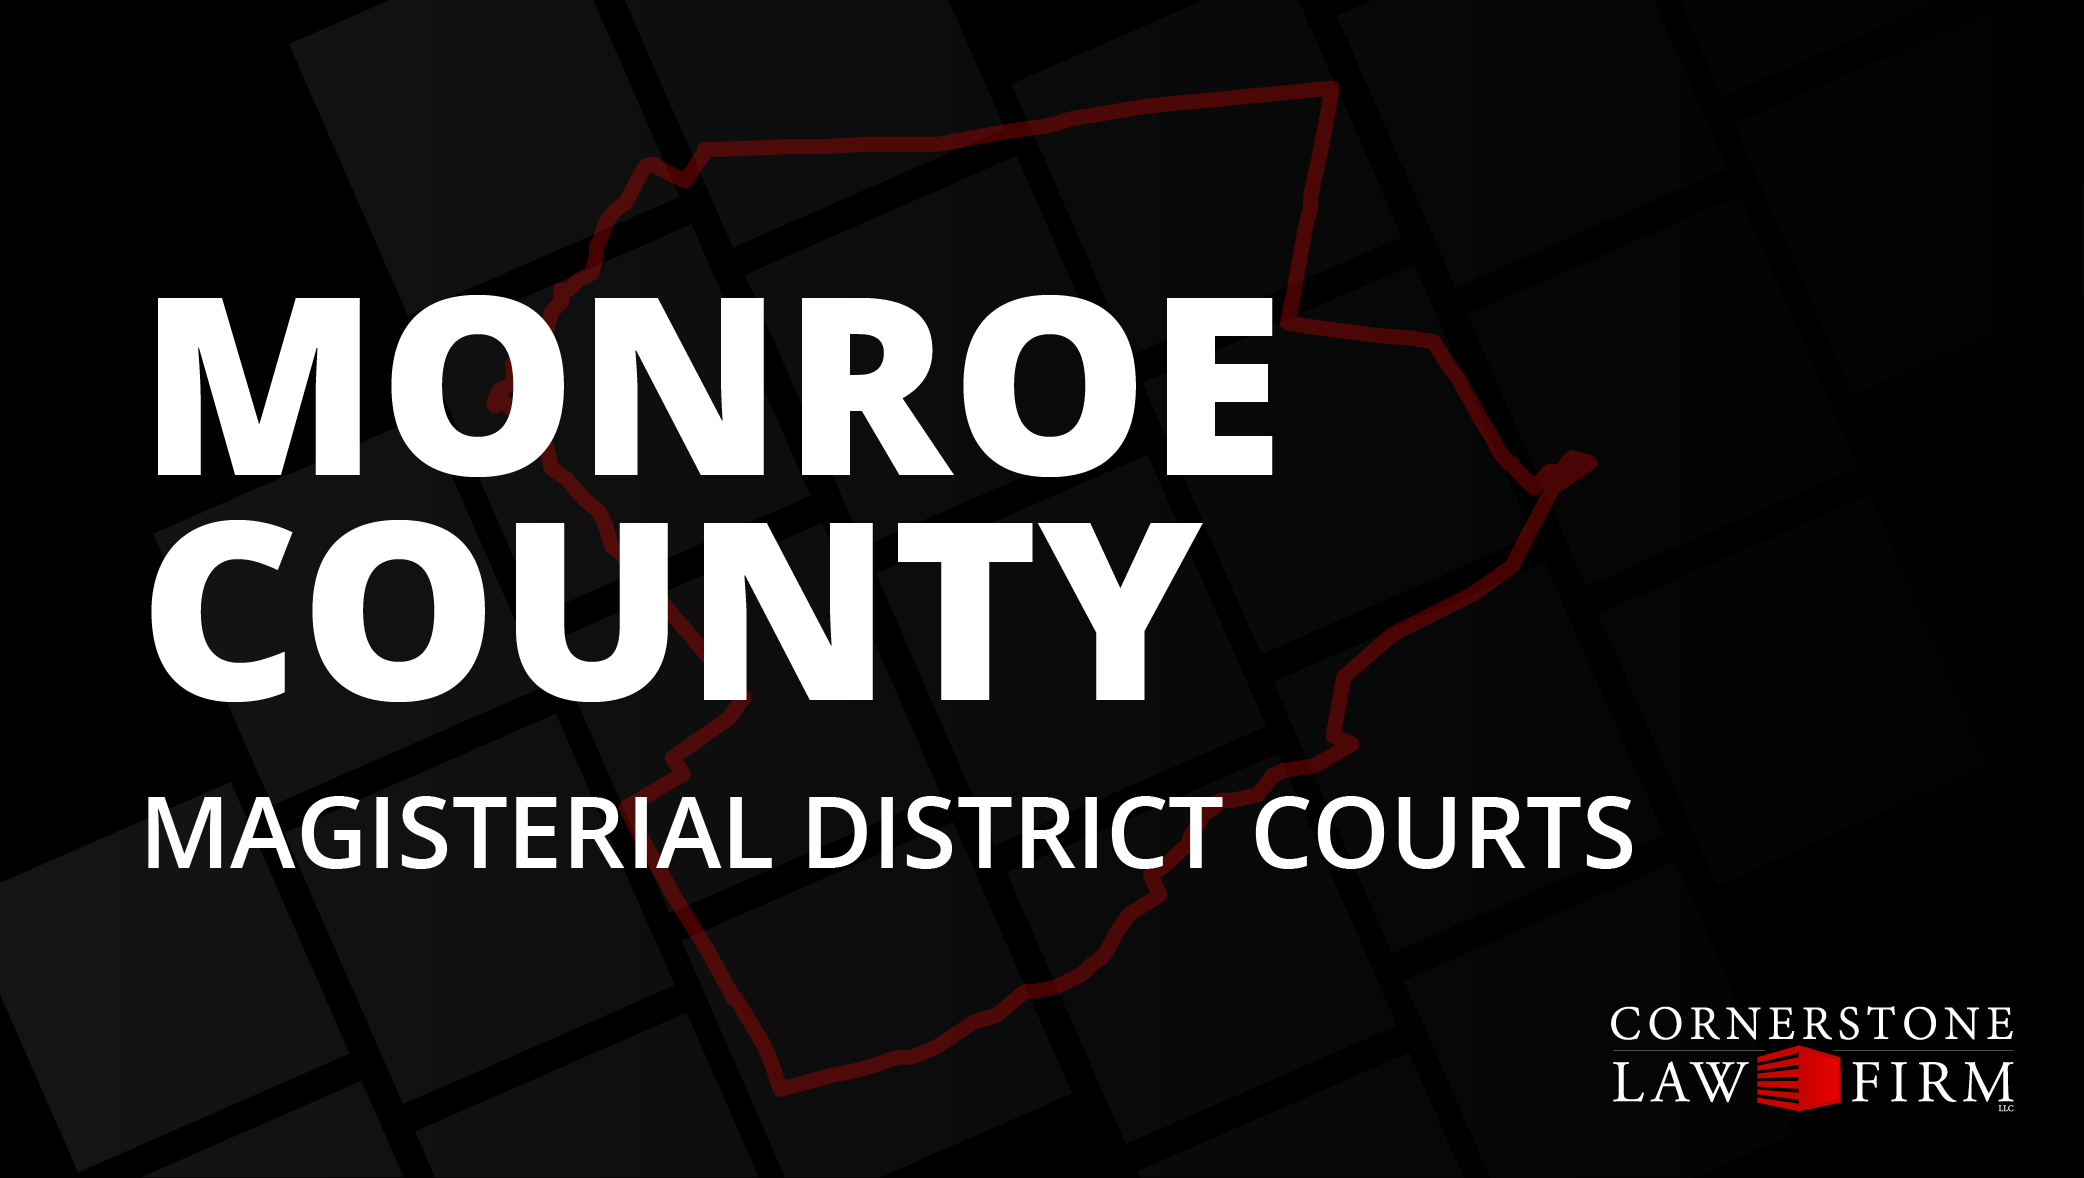 The words "Monroe County Magisterial District Courts" over a black background with a faded red outline of the county.